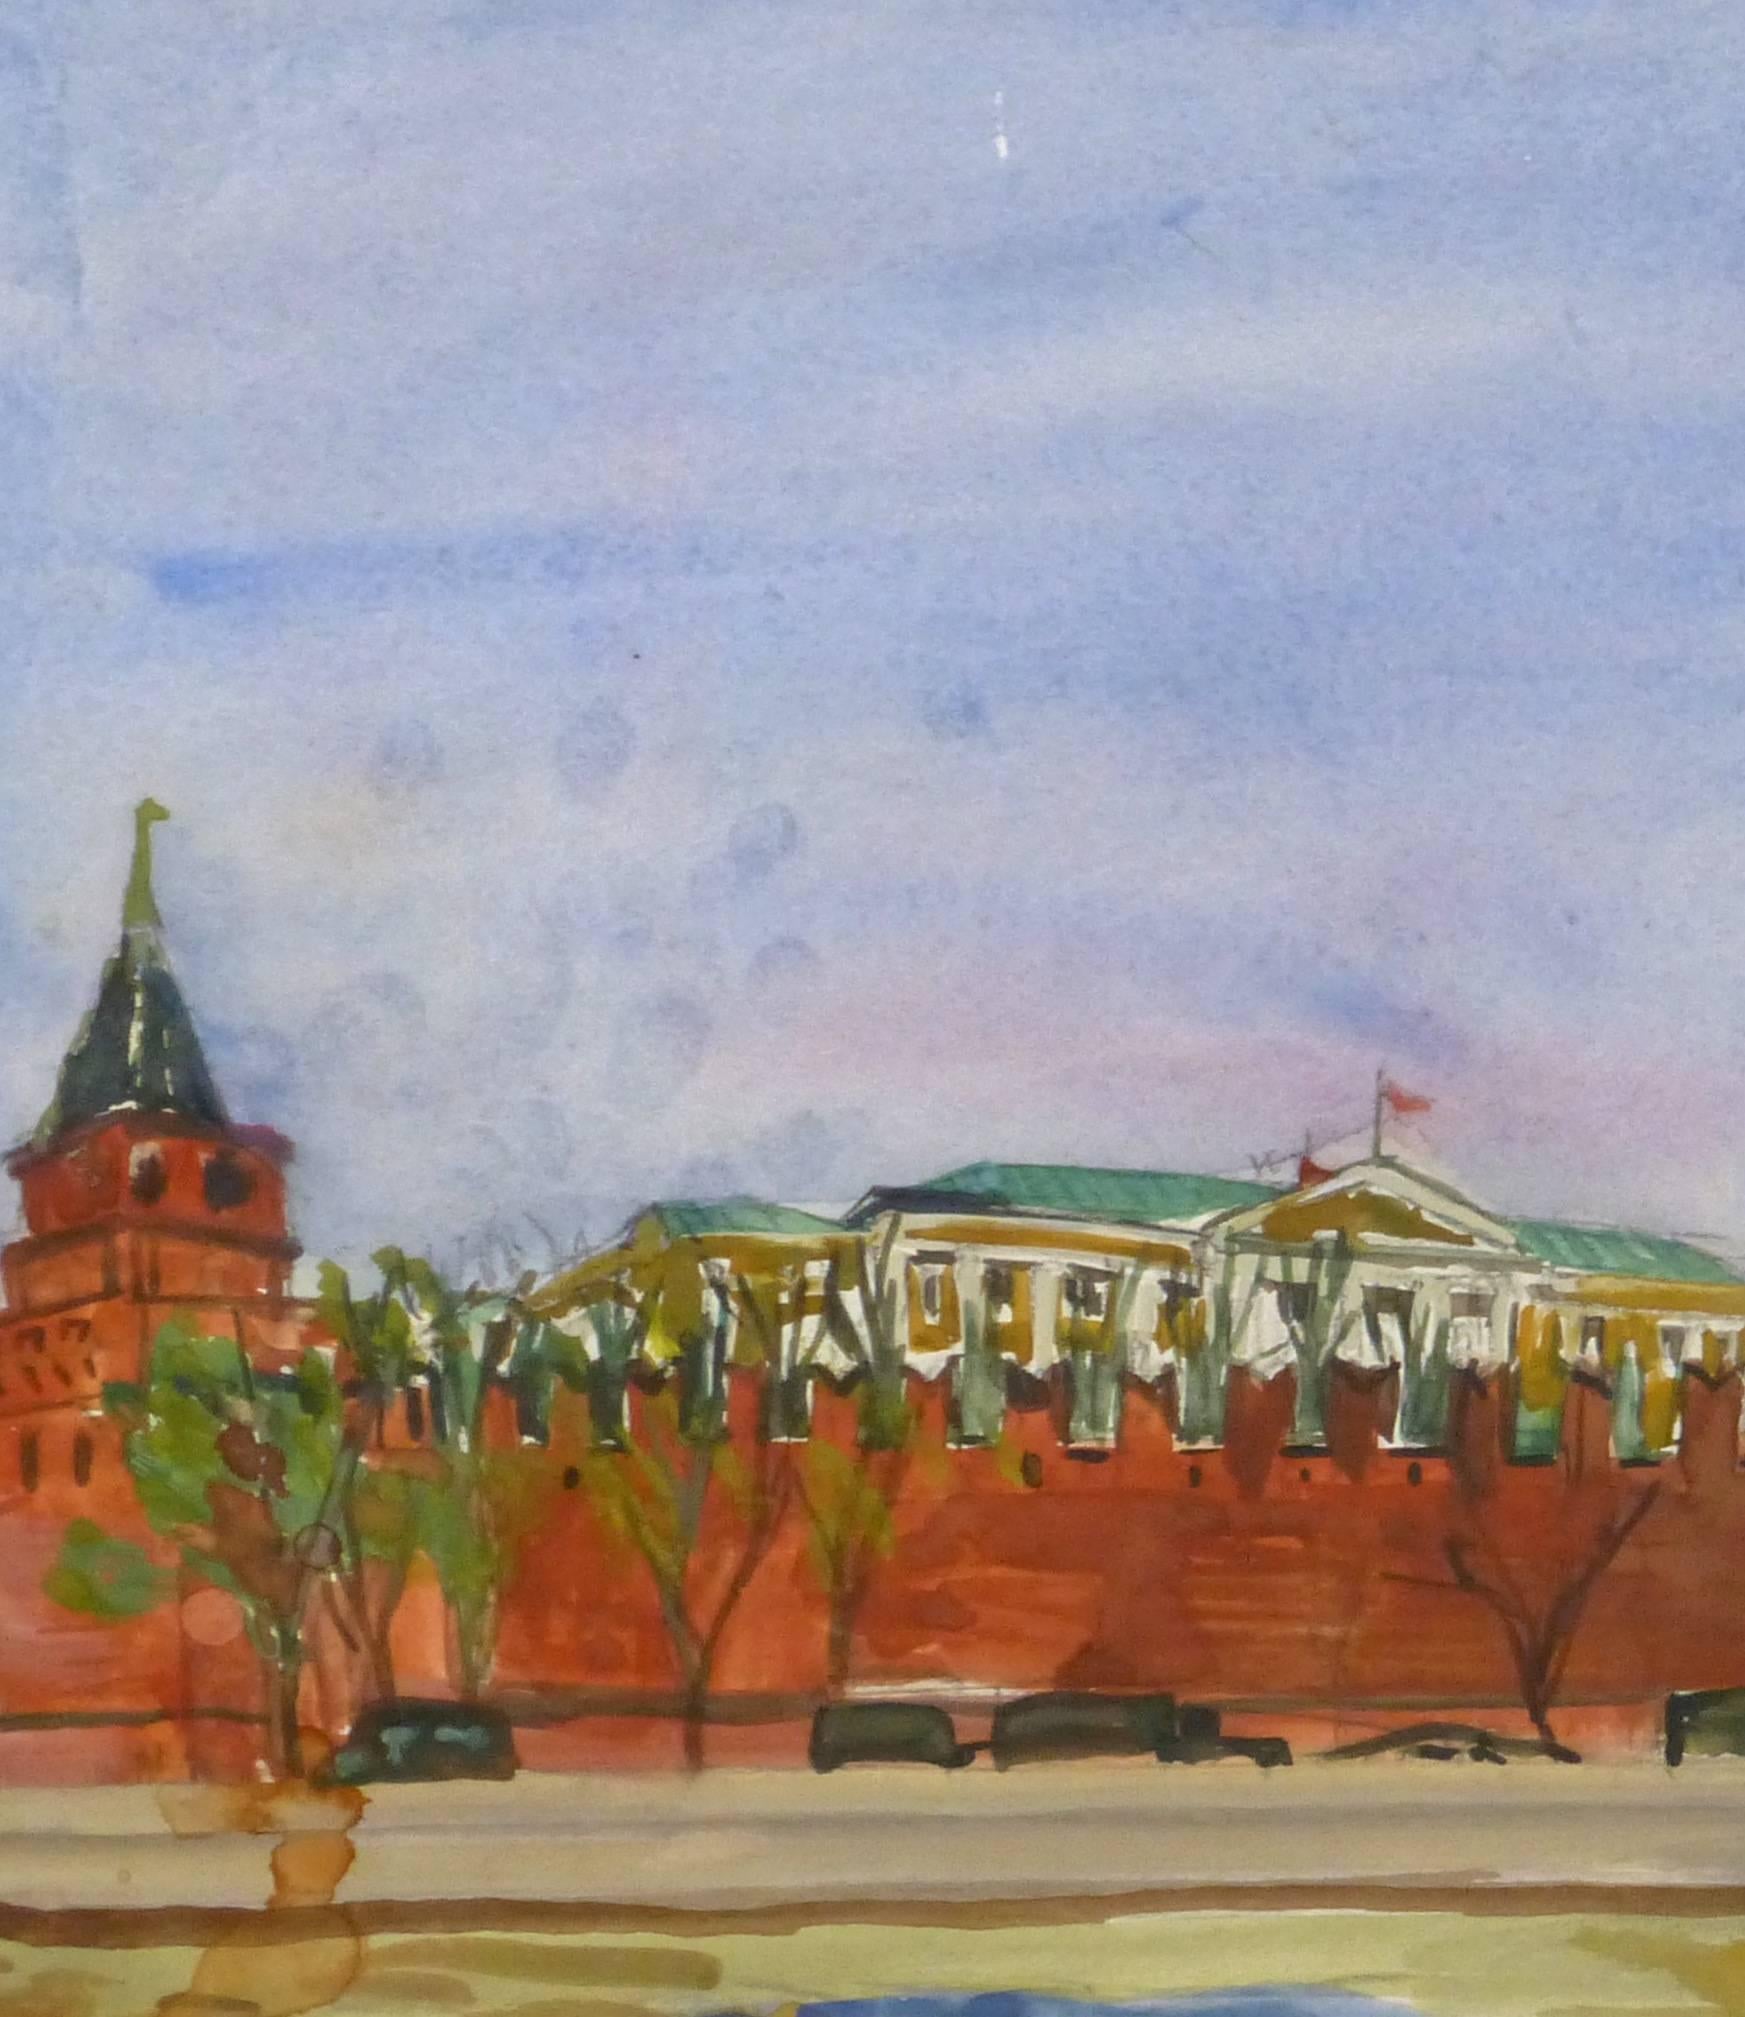 Vintage Landscape - Kremlin, Russia - Painting by Unknown